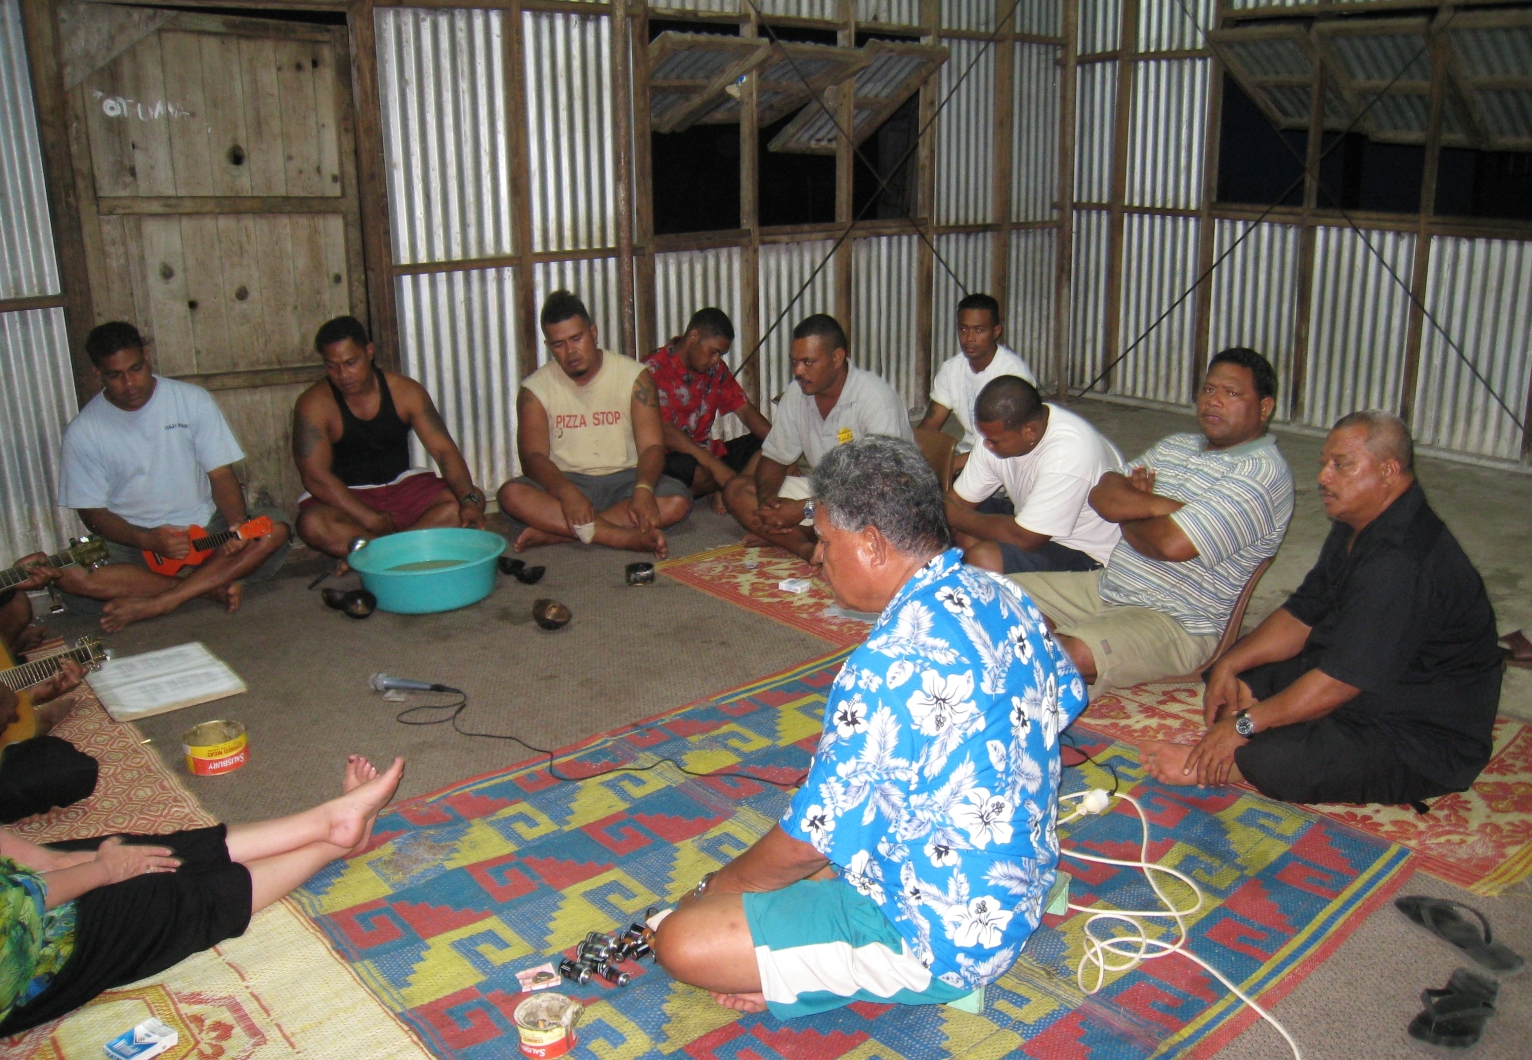 Trying to get the tape recorder working at the Kava Ceremony